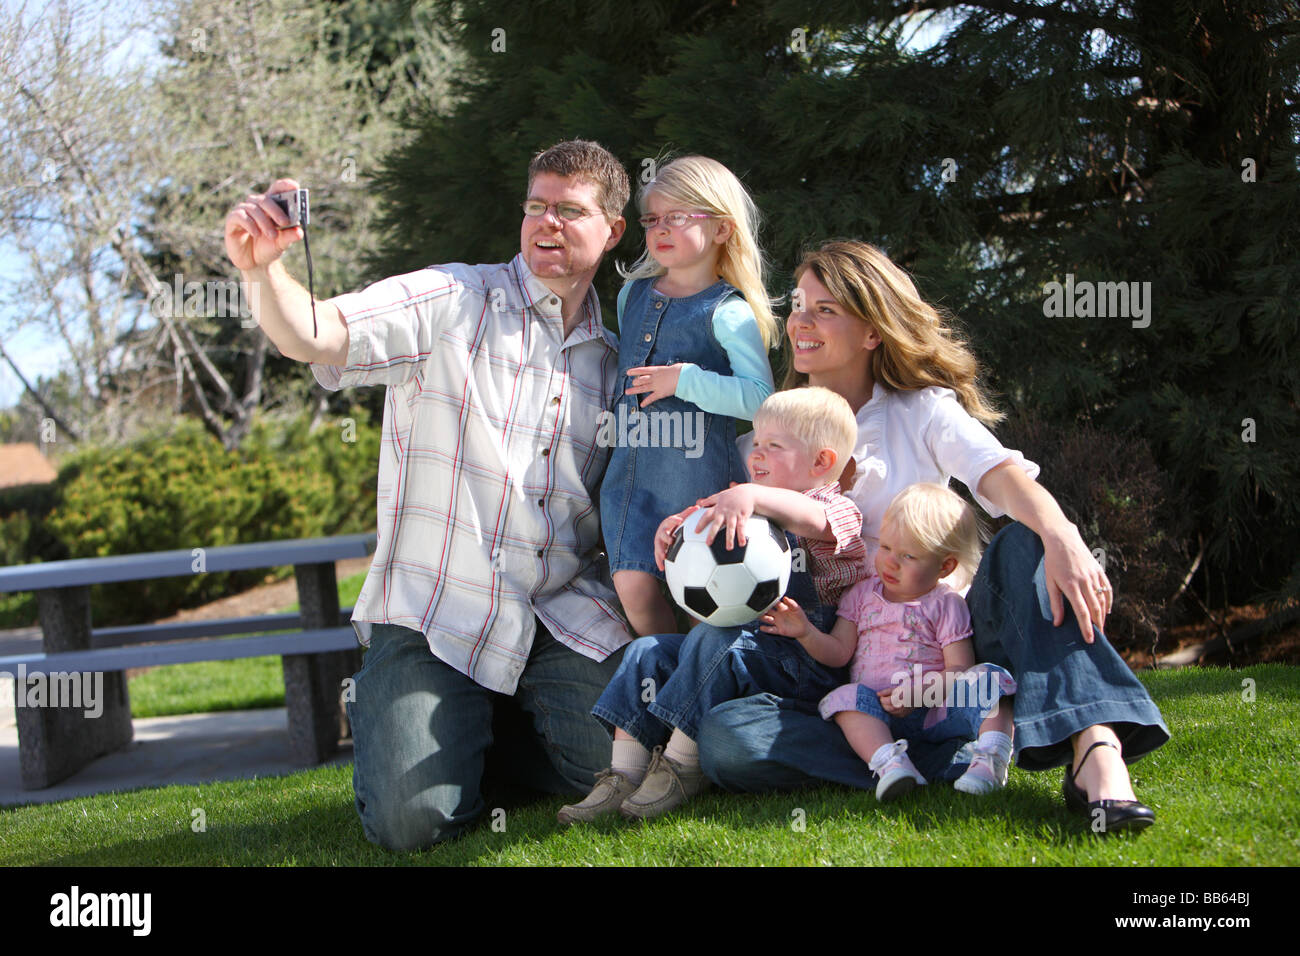 Family with camera taking a self portrait at park Stock Photo